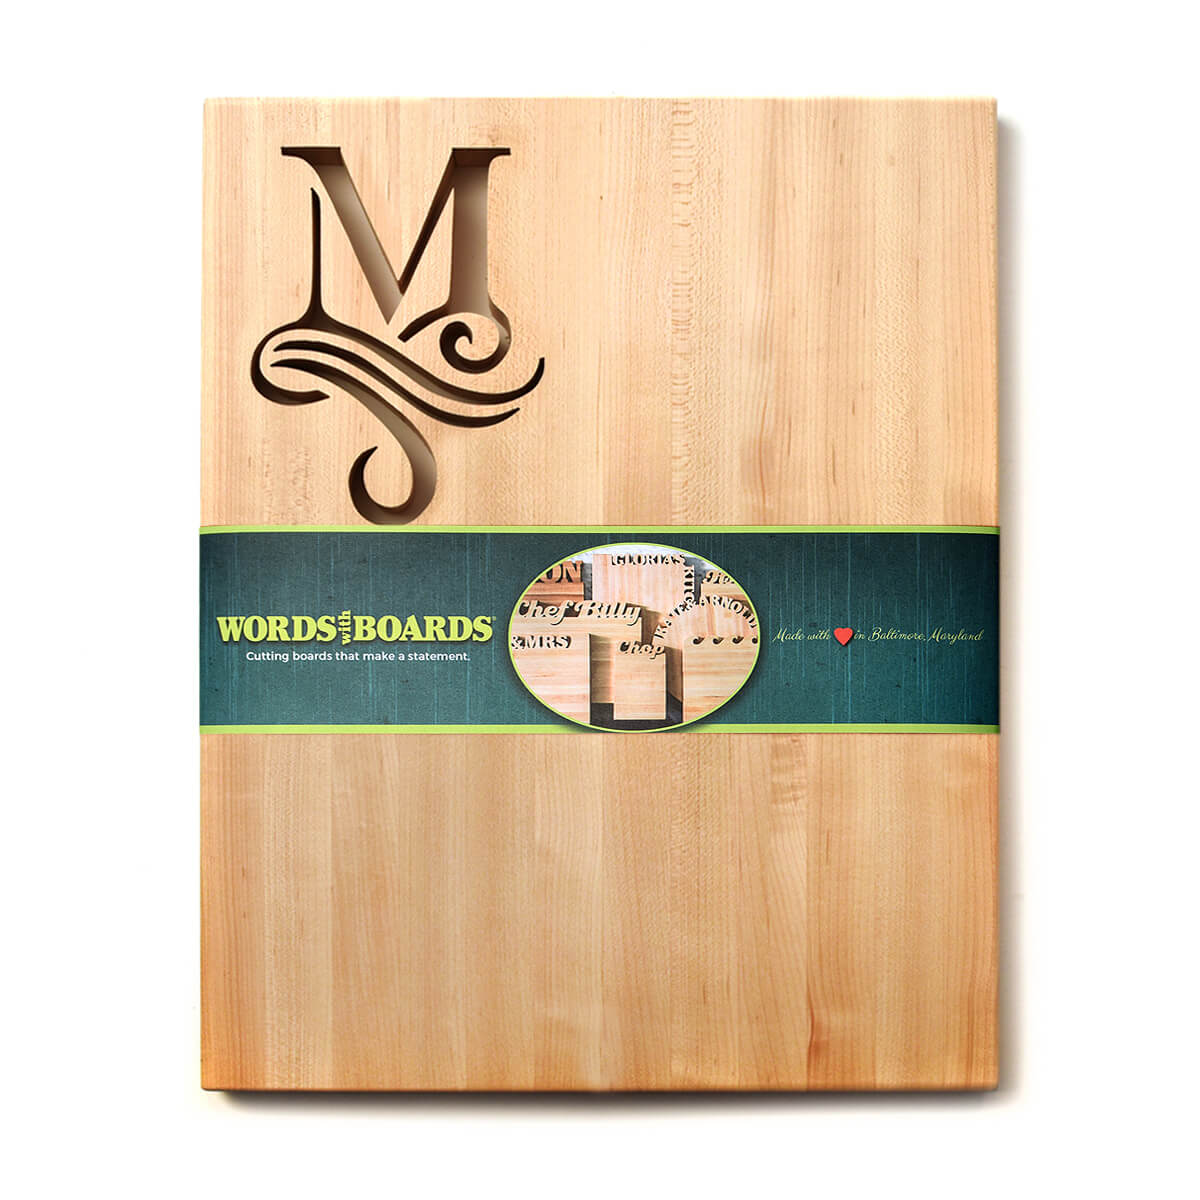 Home Owners Personalized Extra Large Wood Cutting Board- 15x21